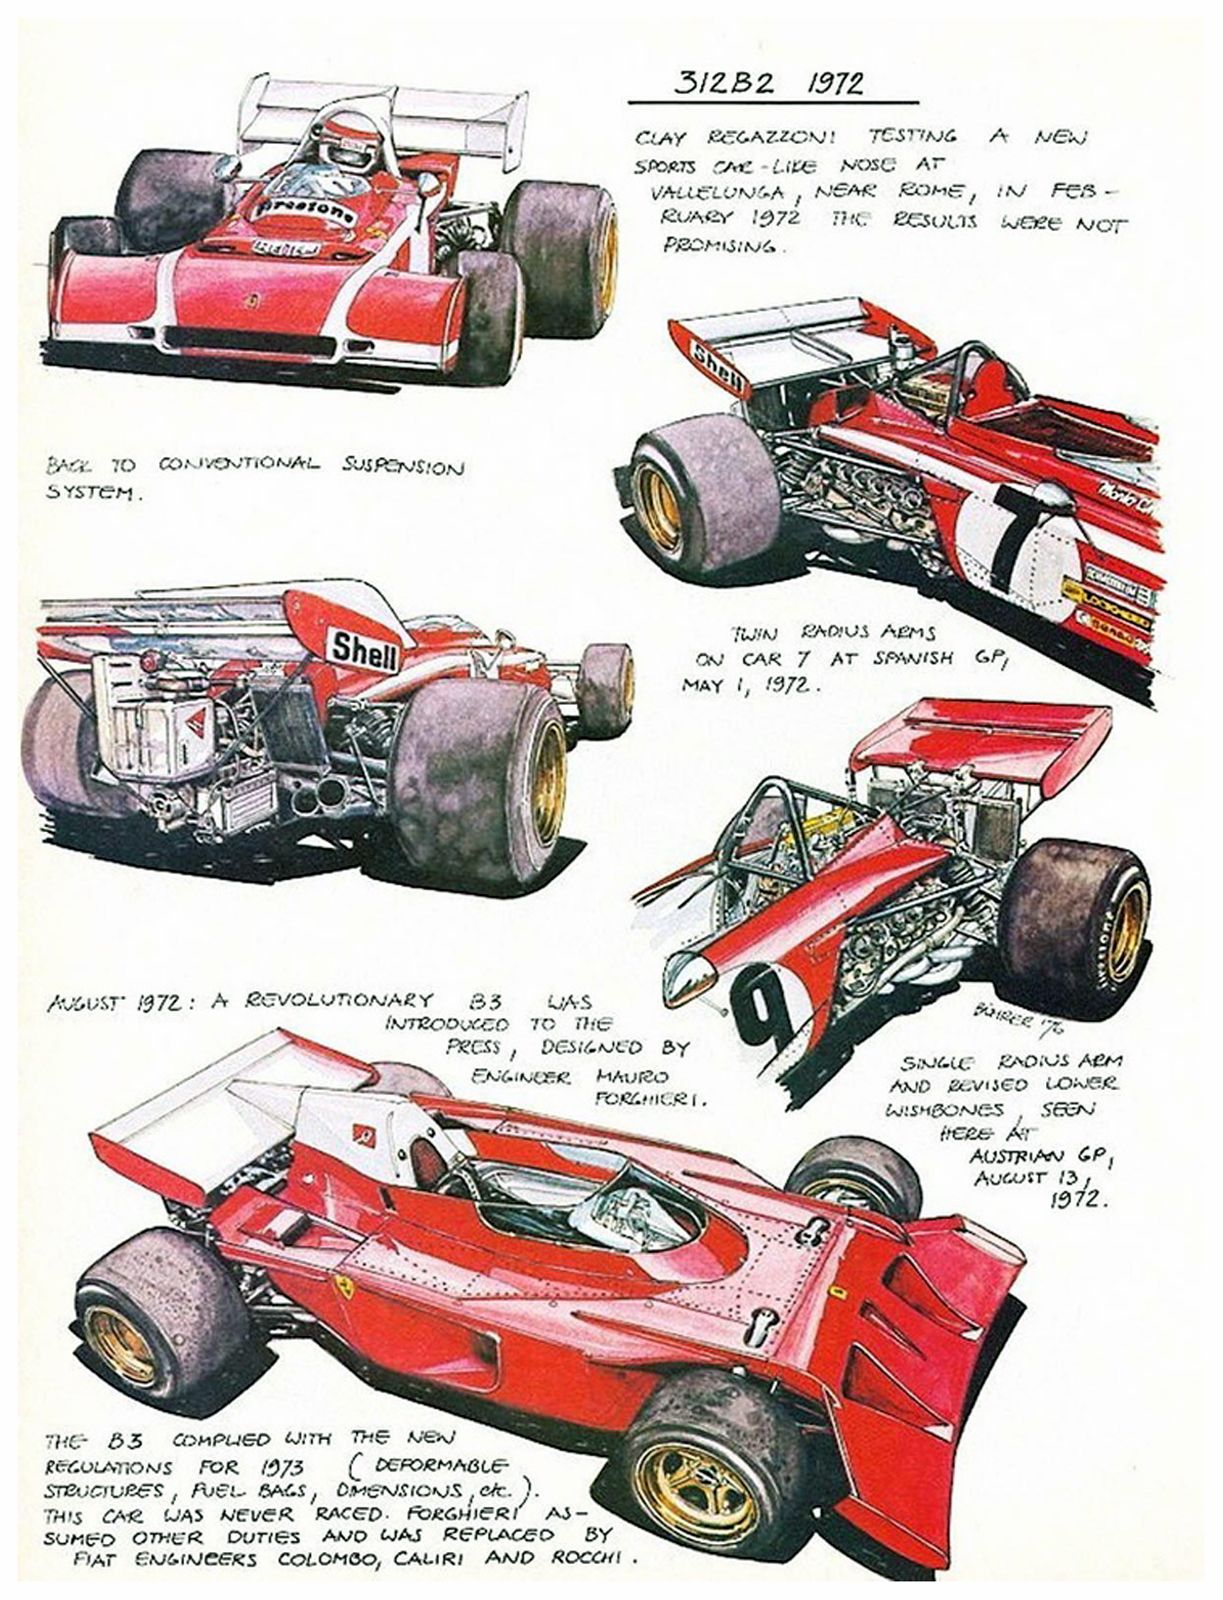 Some masterpieces of Werner BUHRER - Old glory Ferrari